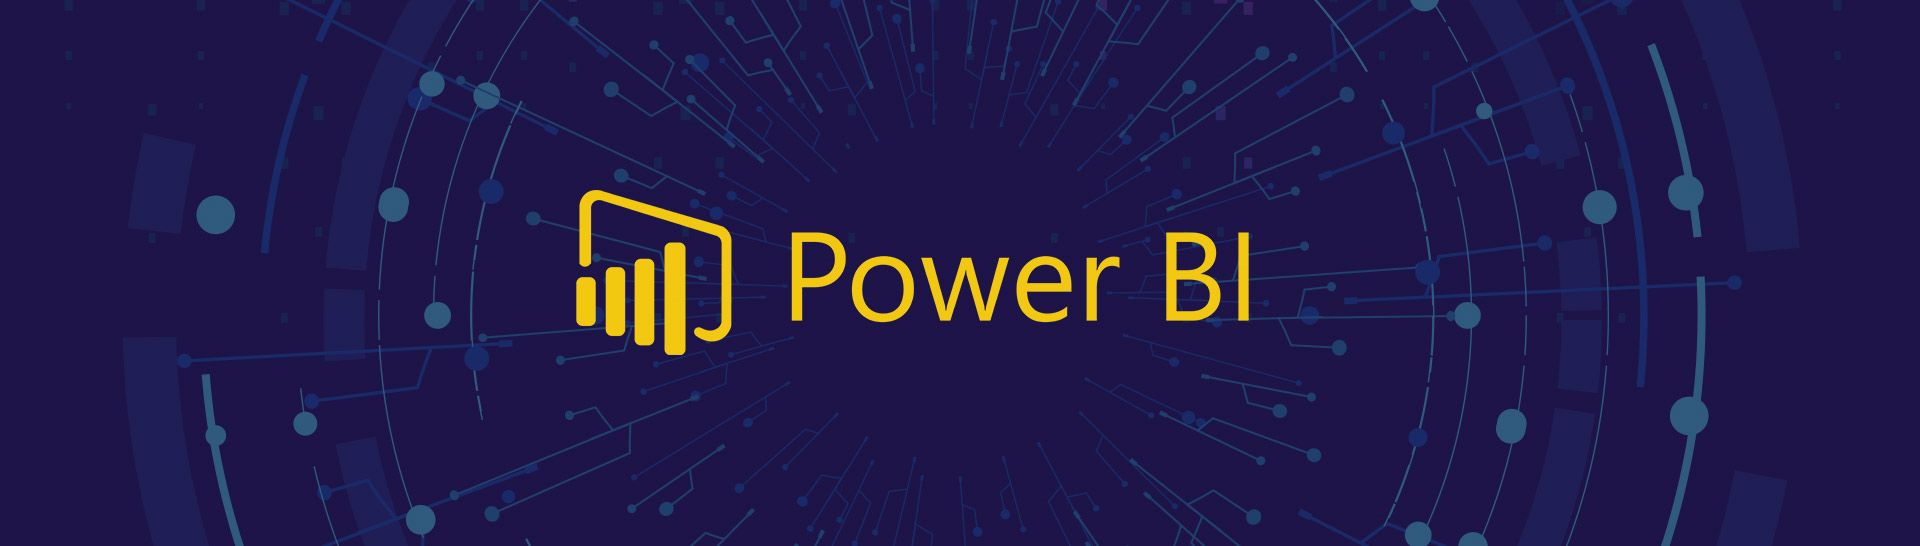 visualizing government financial data quickly and easily with microsoft powerbi